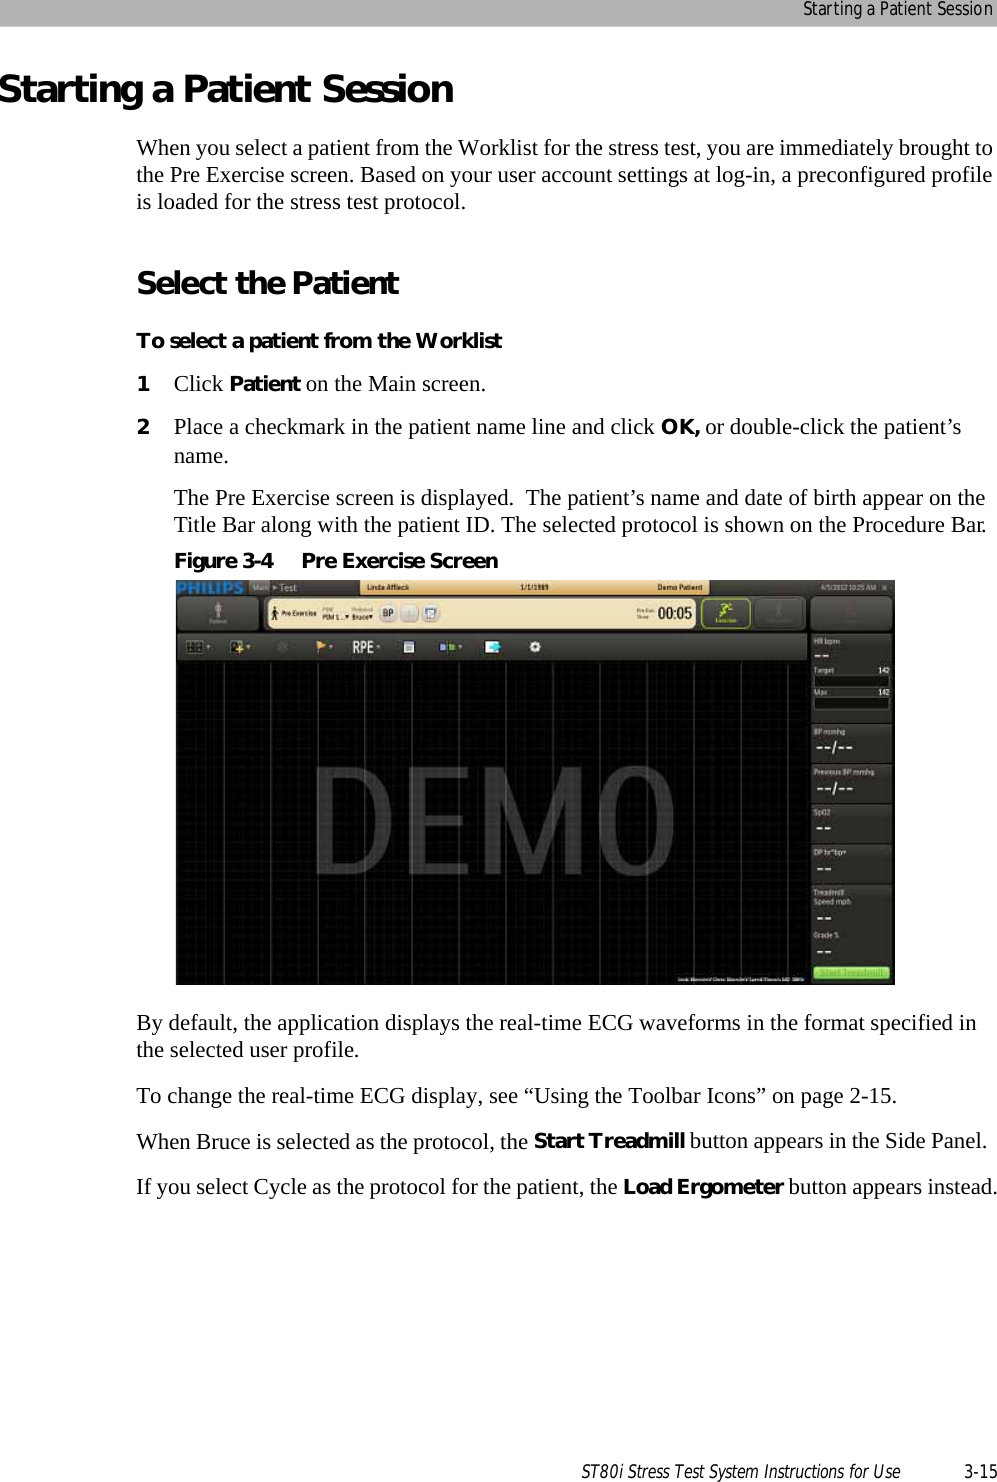 Starting a Patient SessionST80i Stress Test System Instructions for Use 3-15Starting a Patient SessionWhen you select a patient from the Worklist for the stress test, you are immediately brought to the Pre Exercise screen. Based on your user account settings at log-in, a preconfigured profile is loaded for the stress test protocol.Select the PatientTo select a patient from the Worklist1Click Patient on the Main screen.2Place a checkmark in the patient name line and click OK, or double-click the patient’s name.The Pre Exercise screen is displayed.  The patient’s name and date of birth appear on the Title Bar along with the patient ID. The selected protocol is shown on the Procedure Bar.Figure 3-4 Pre Exercise ScreenBy default, the application displays the real-time ECG waveforms in the format specified in the selected user profile. To change the real-time ECG display, see “Using the Toolbar Icons” on page 2-15.When Bruce is selected as the protocol, the Start Treadmill button appears in the Side Panel.  If you select Cycle as the protocol for the patient, the Load Ergometer button appears instead.